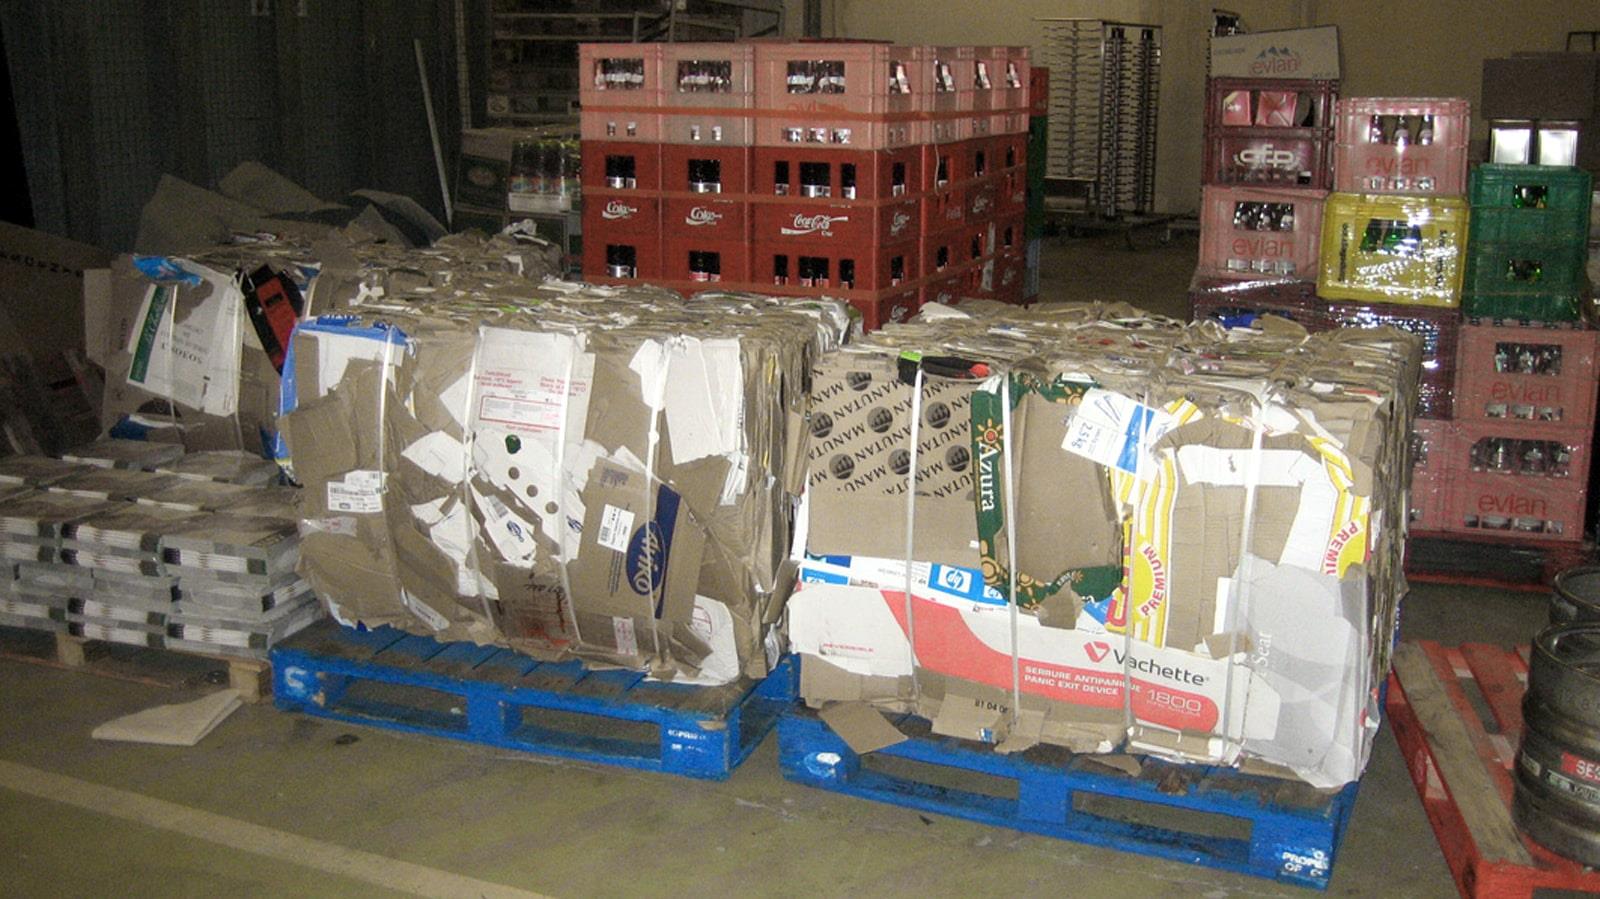 Cardboard bales and bottle crates in basement of Hilton Hotel